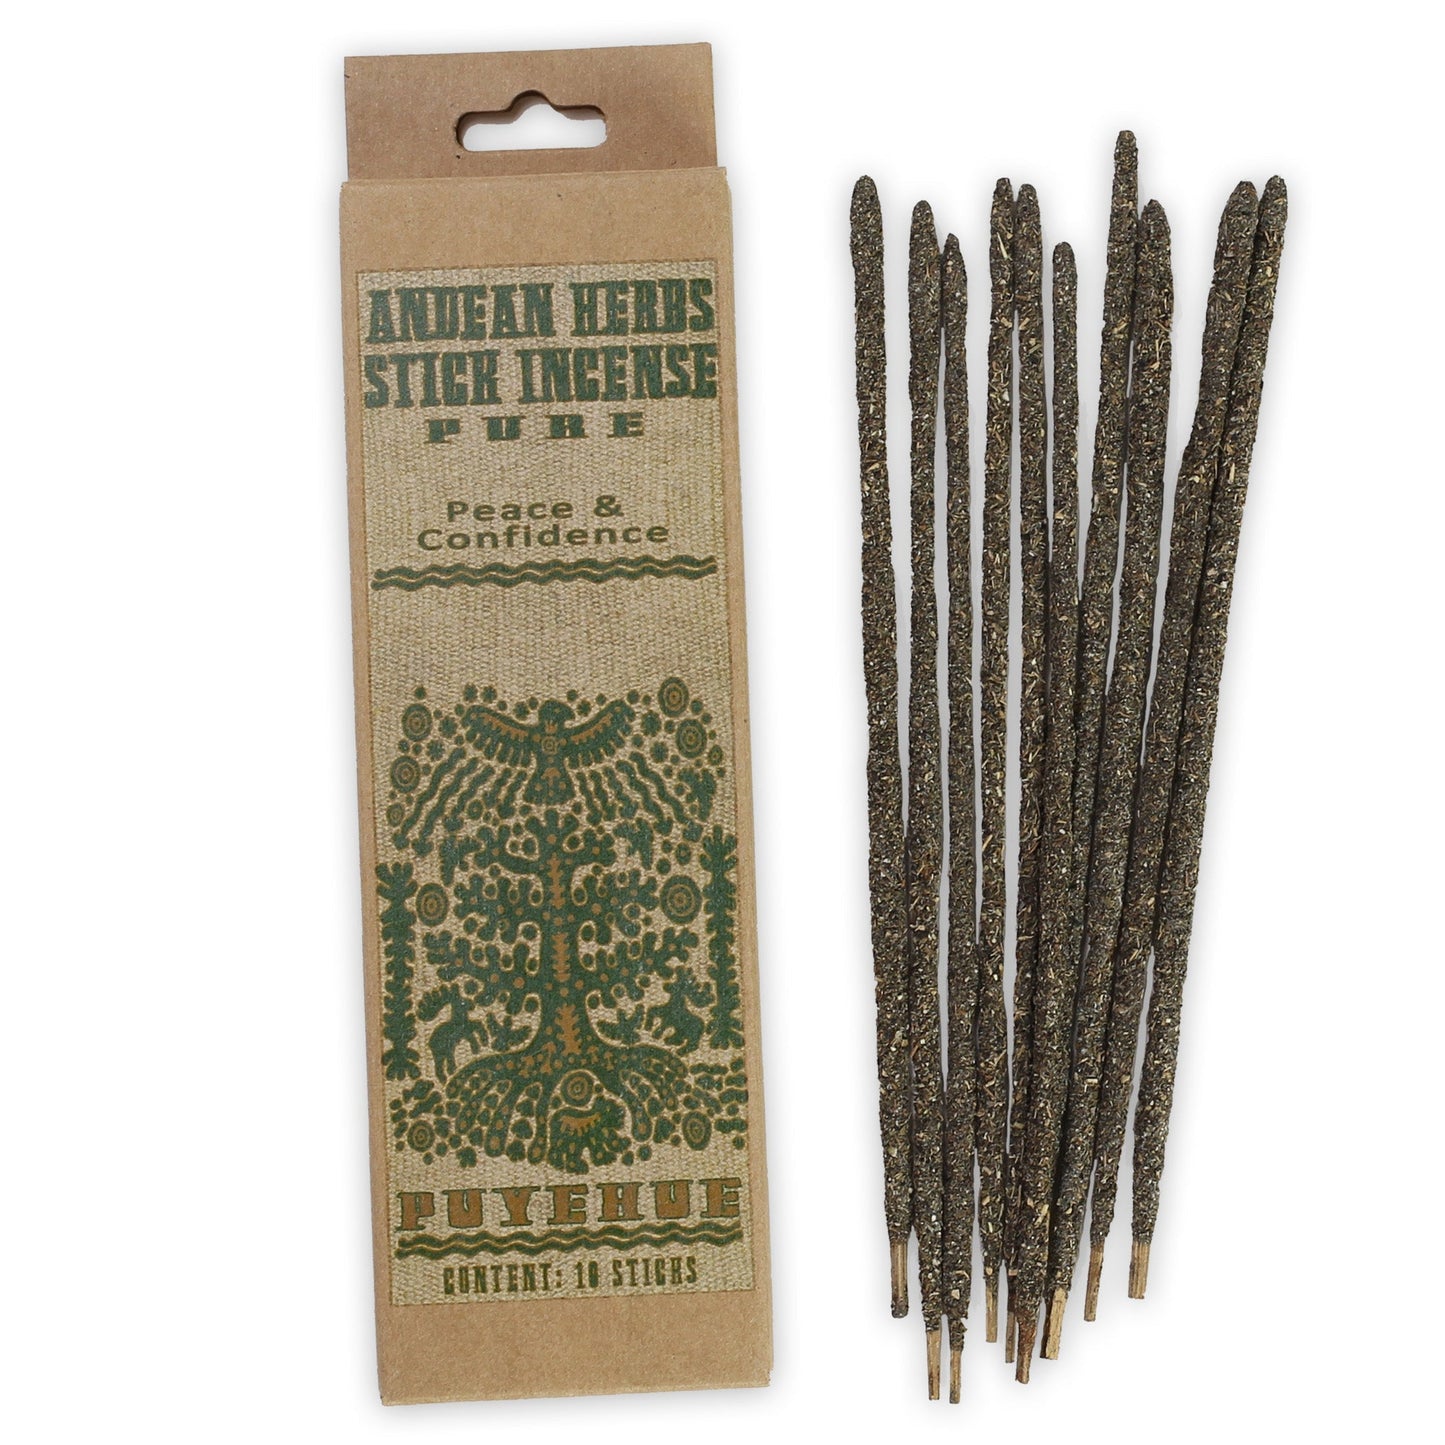 Smudging Incense - Pure - Andean Herbs Incense Sticks - Peace & Confidence - Tree Spirit Wellness